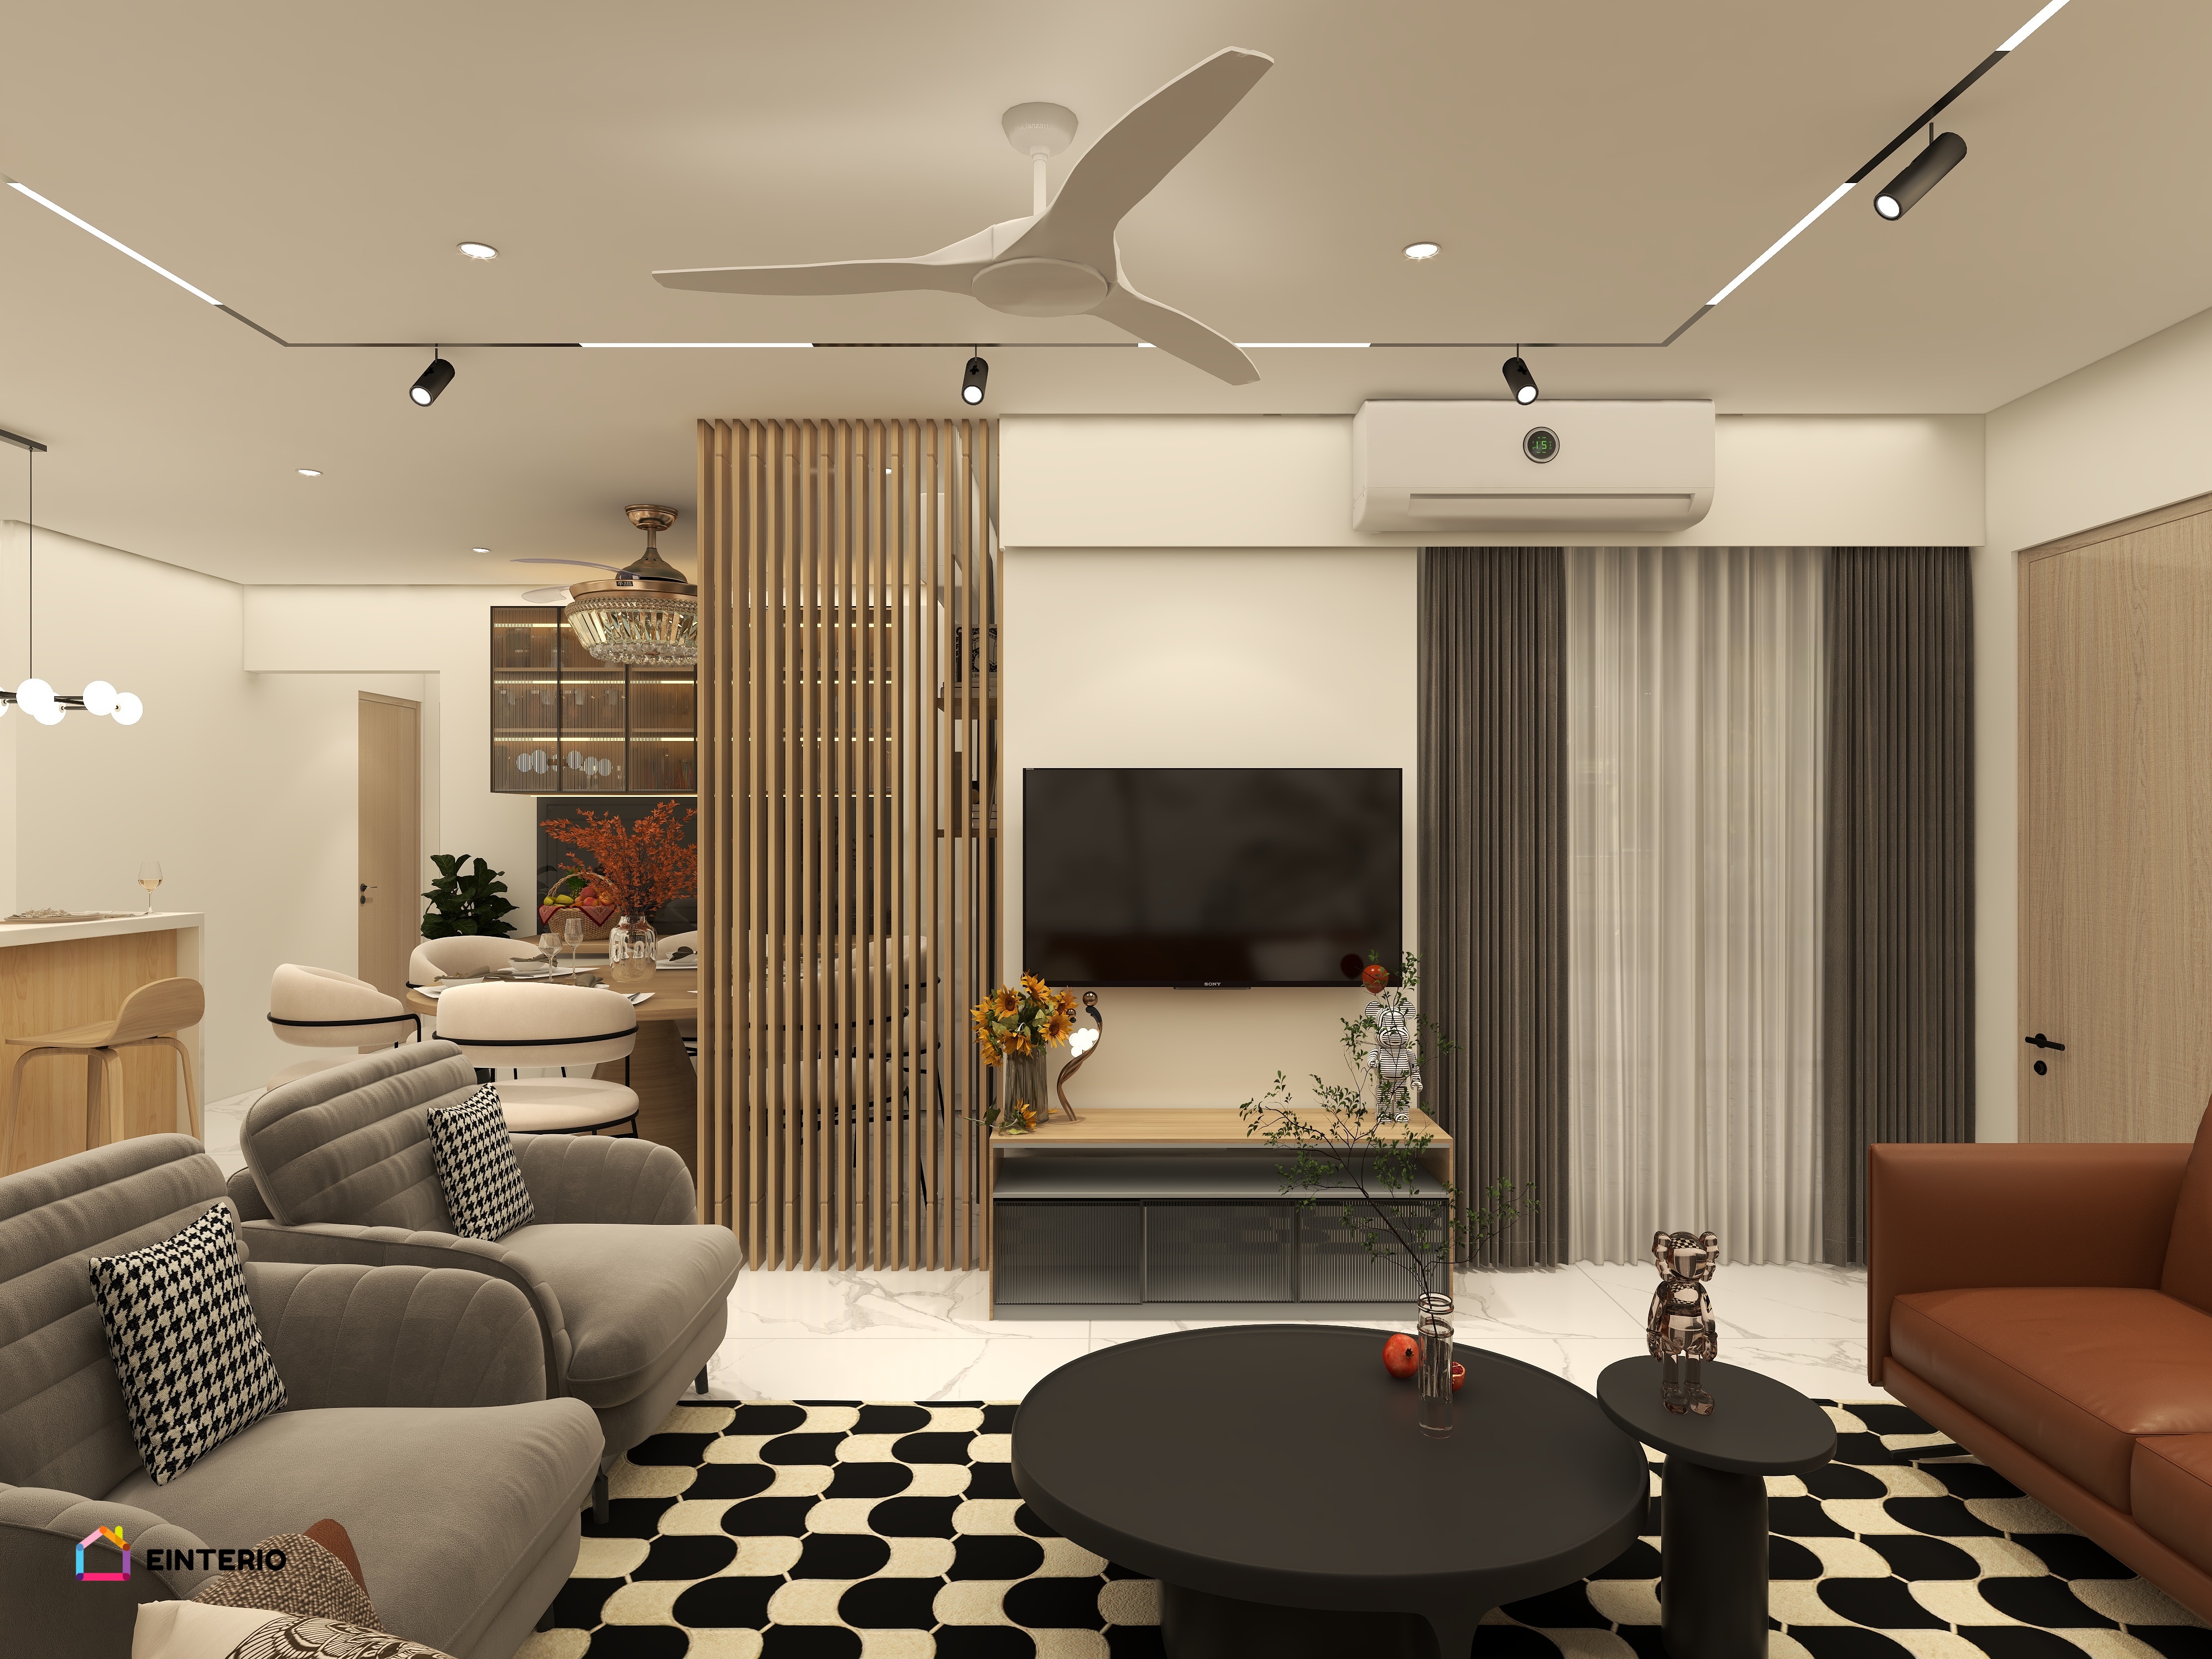 Explore the Modern Elegance: A Stunning 3BHK Home in Pune